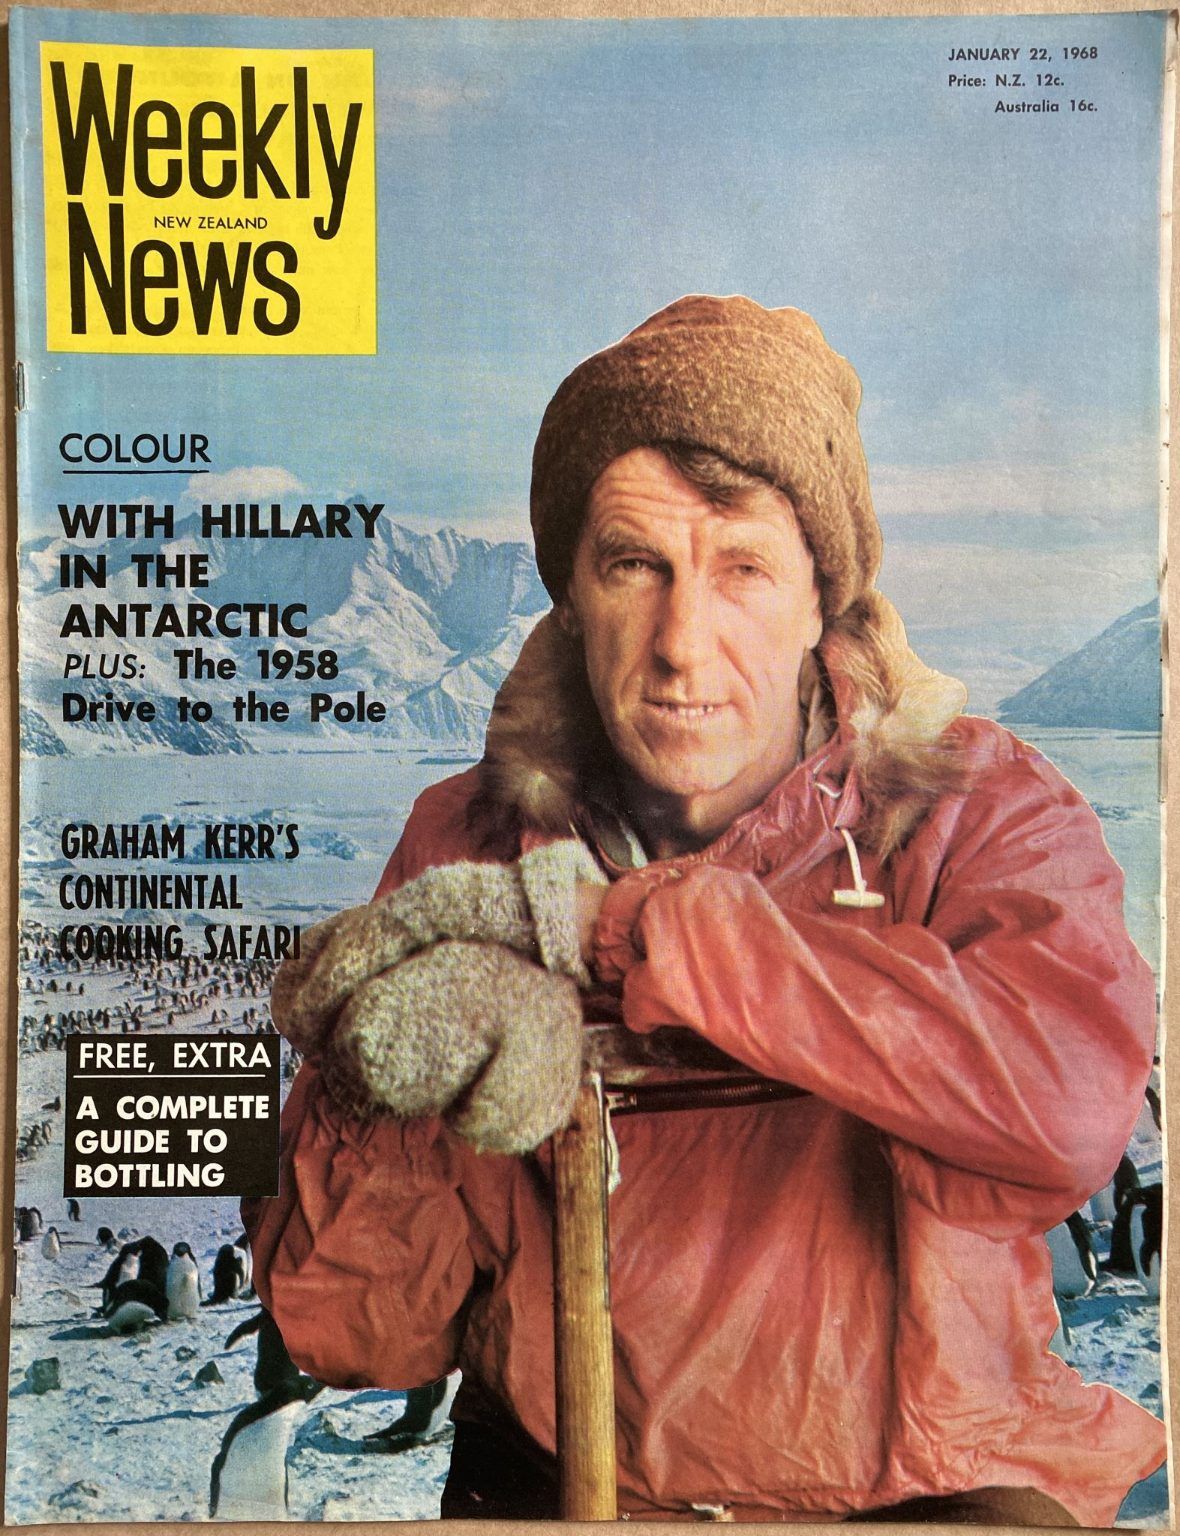 OLD NEWSPAPER: New Zealand Weekly News, No. 5434, 22 January 1968